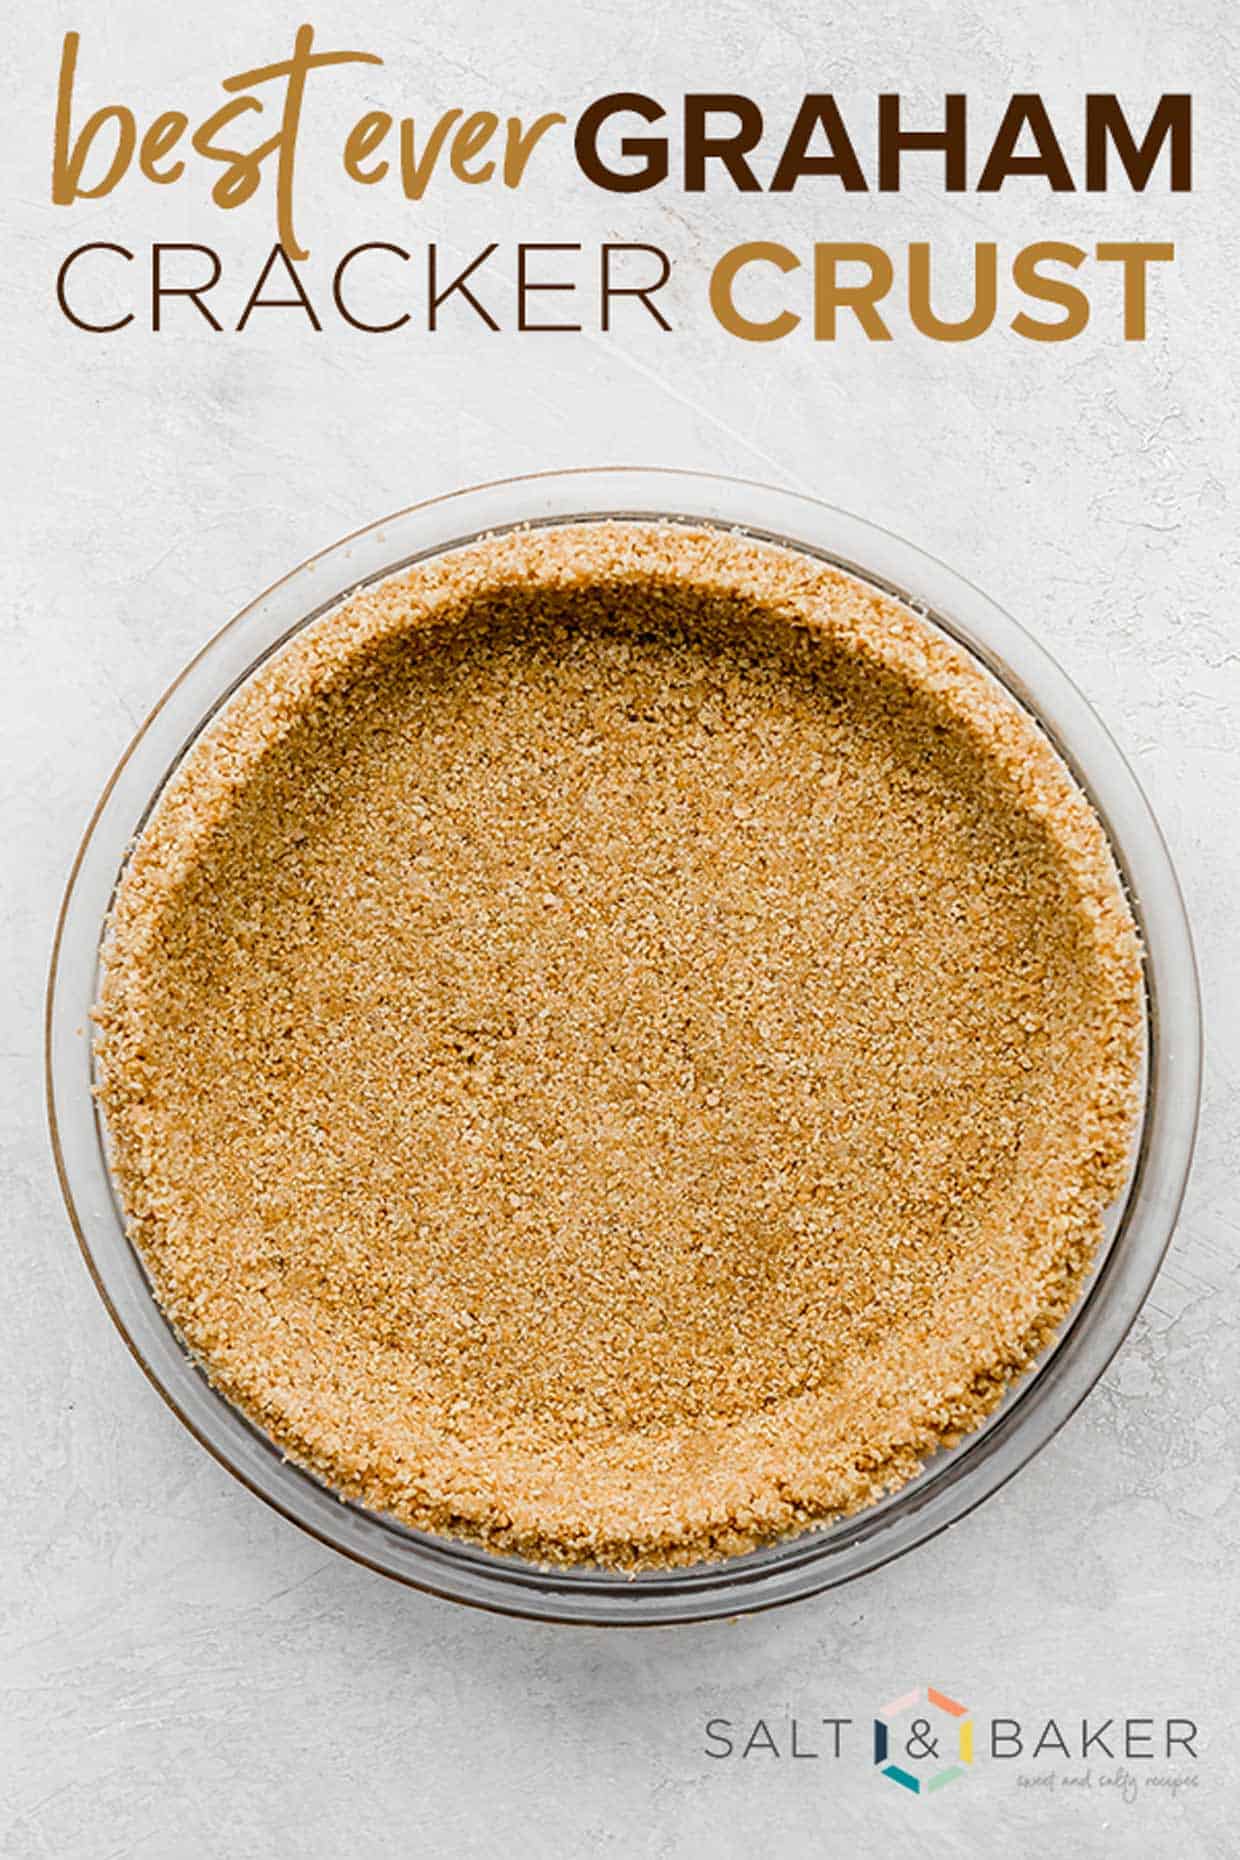 The best Graham Cracker Crust in a pie plate on a white background with the words, "best ever graham cracker crust" written in brown and tan font over the photo.